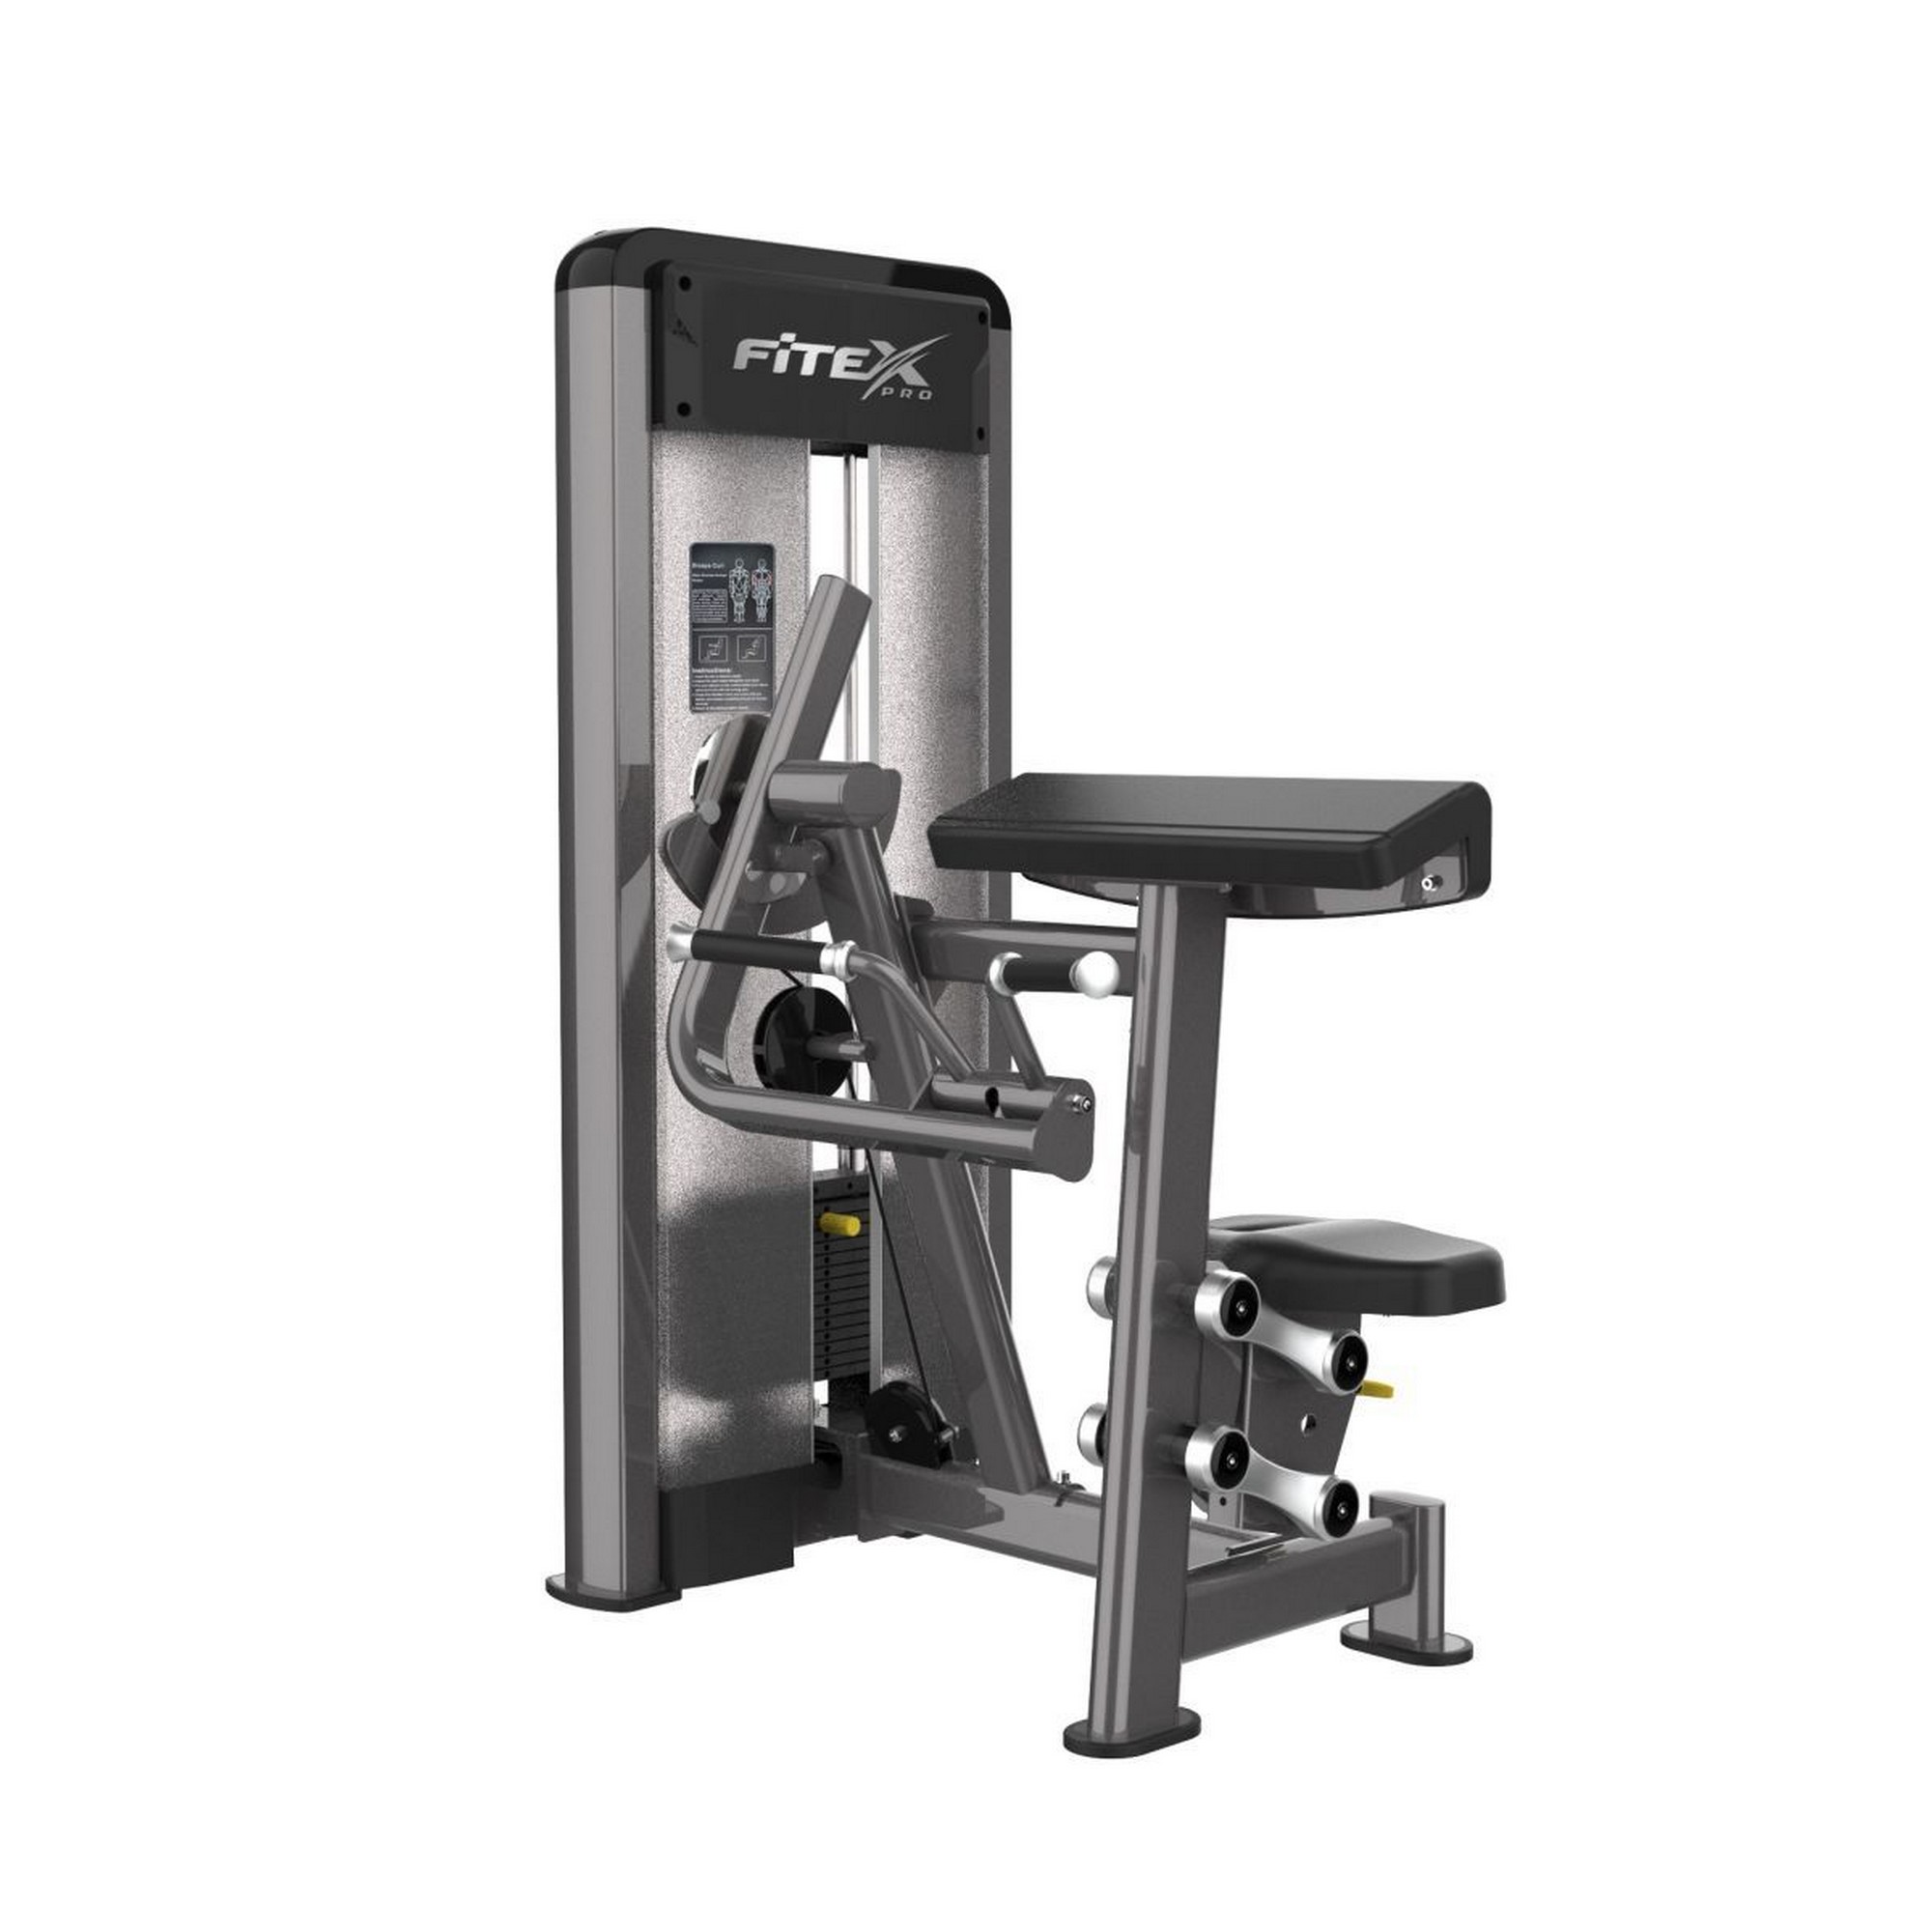 Бицепс машина Fitex Pro FTX-61A10 2000_2000